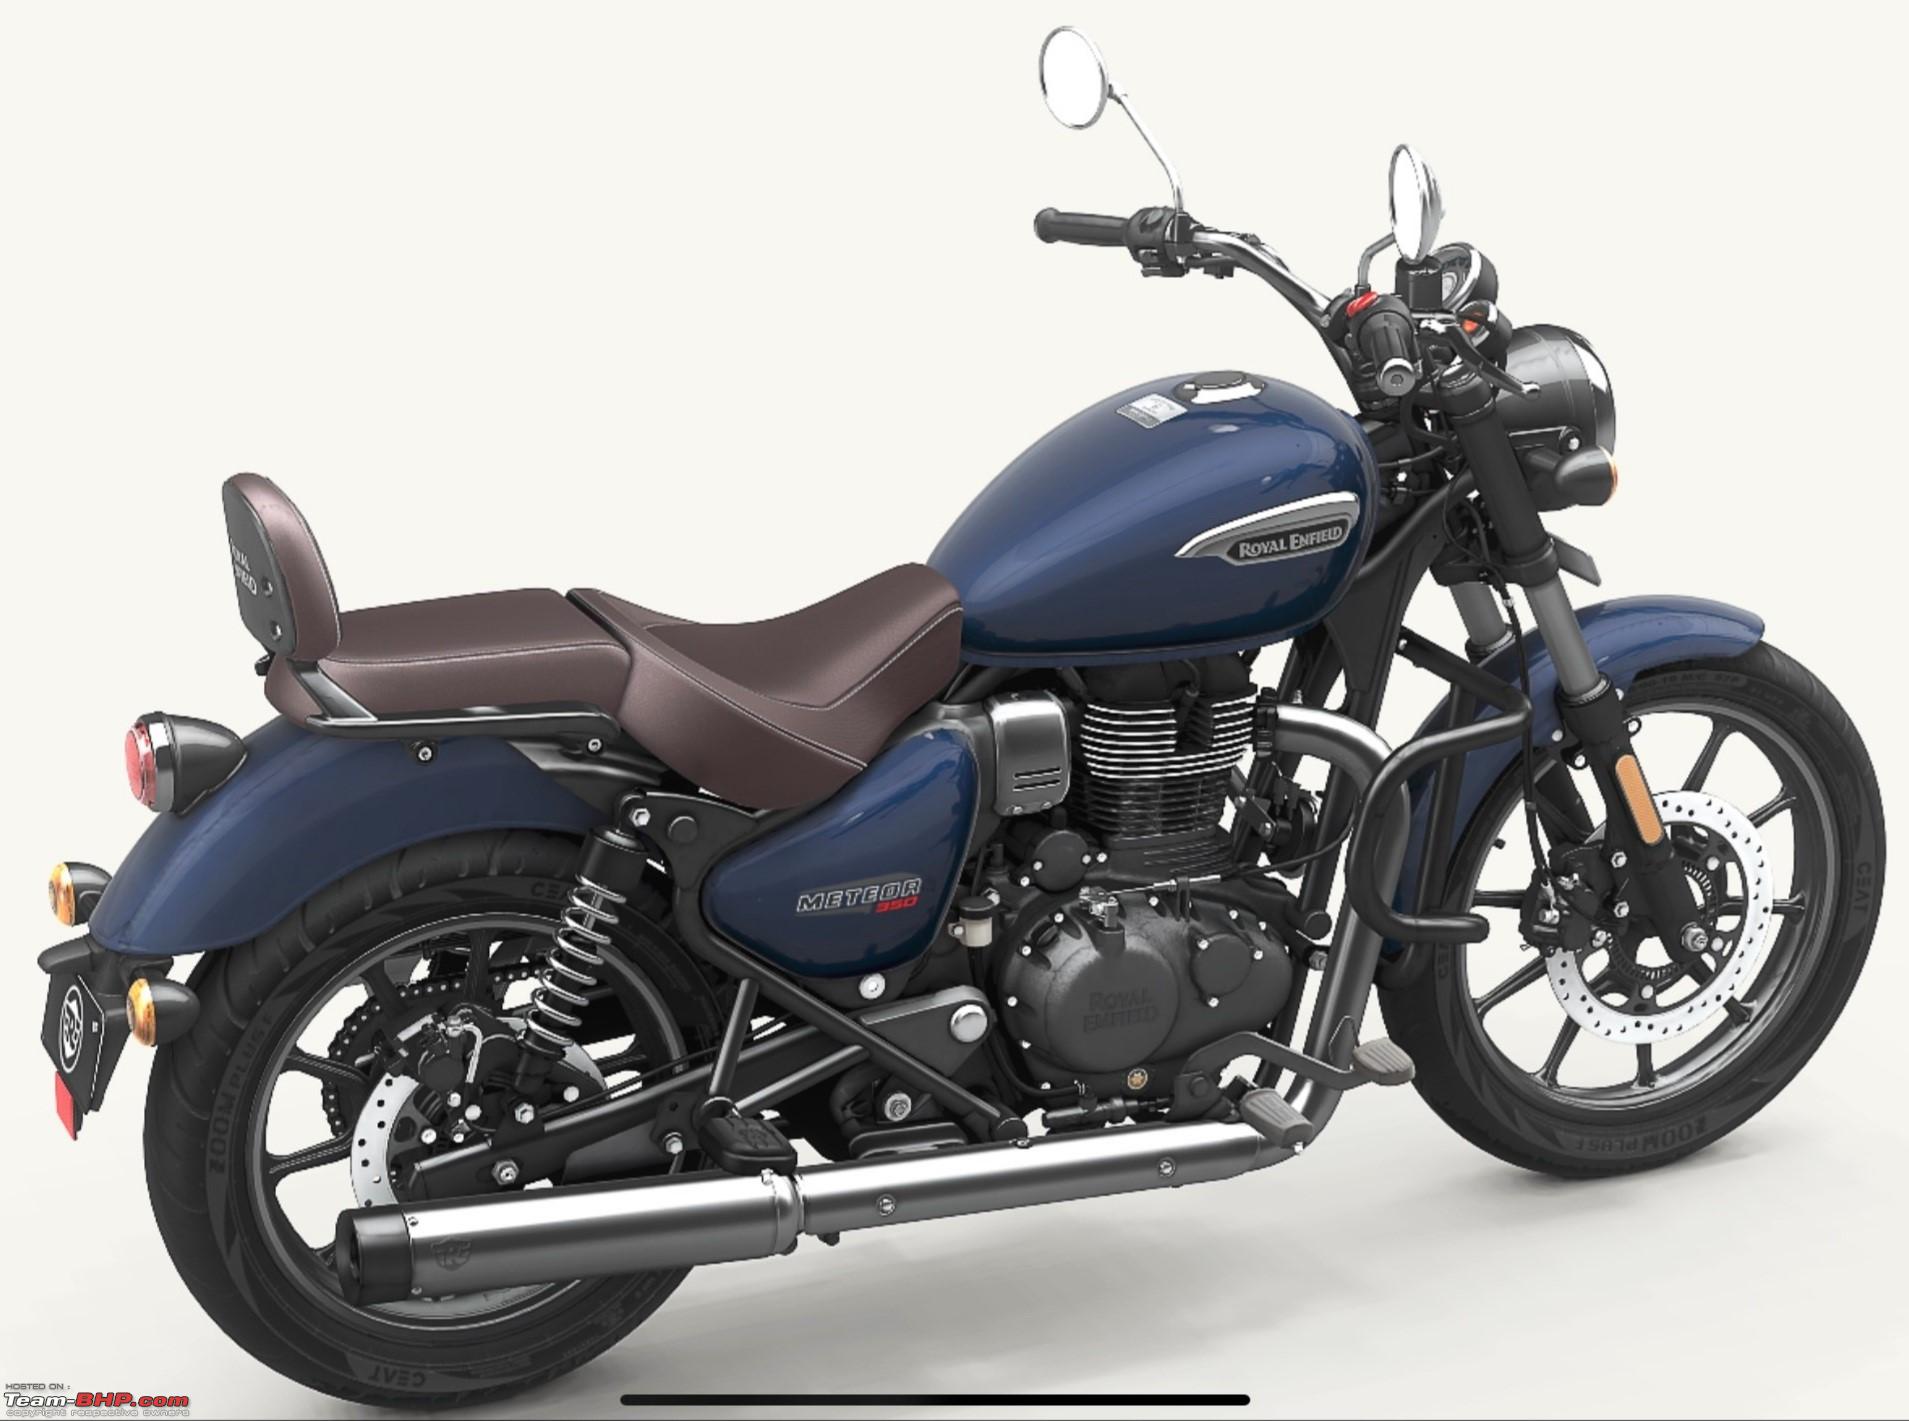 Royal Enfield Meteor 350 Fireball leaked, now launched at 1.75 lakhs